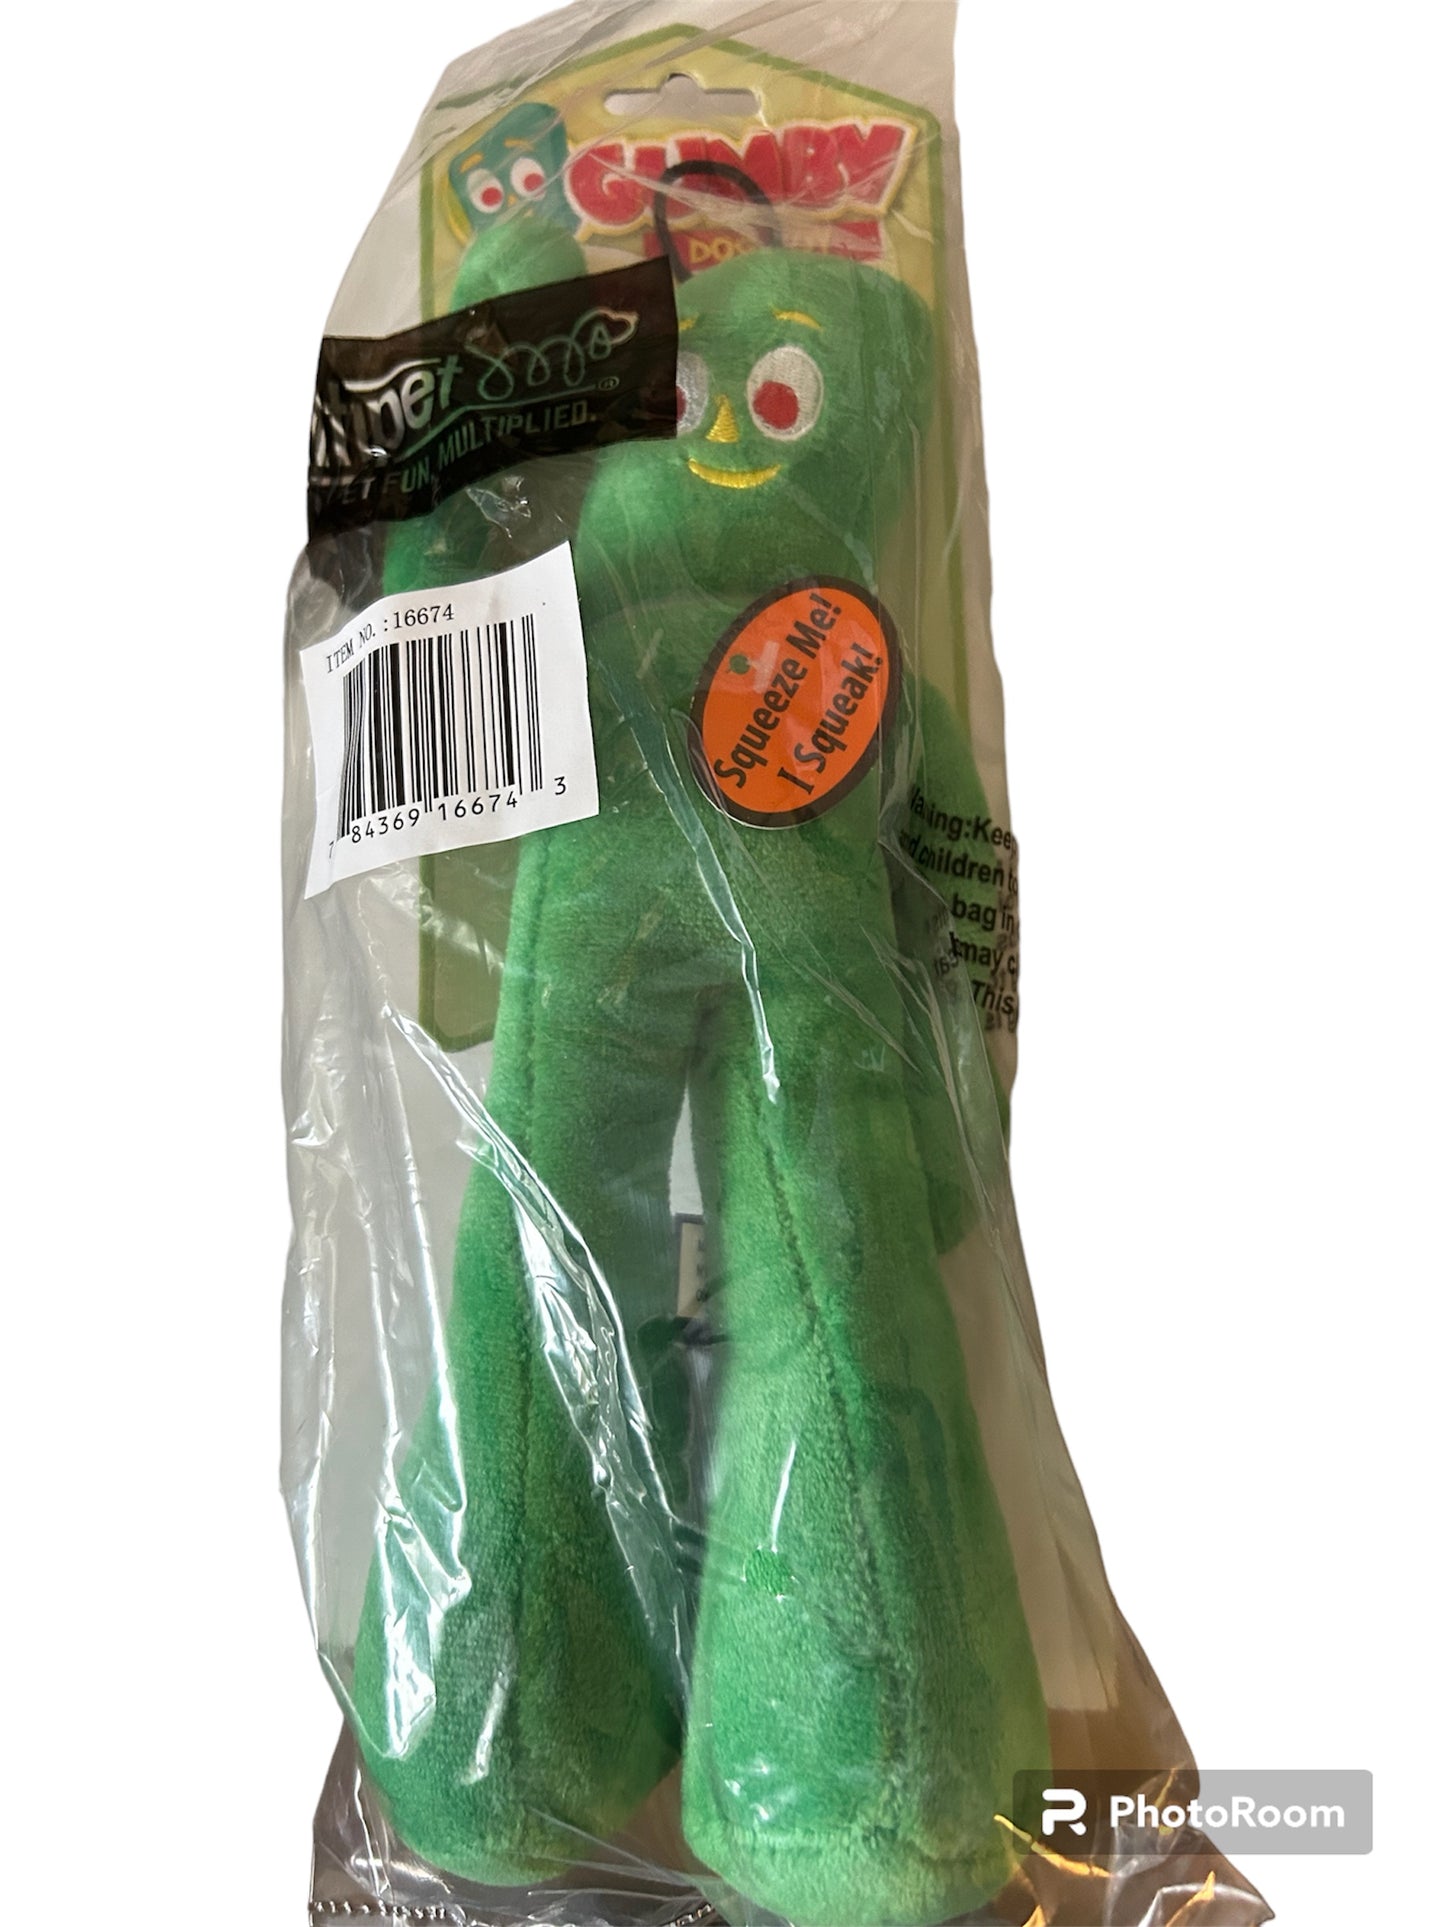 Gumby 9in Plush toy with squeaker